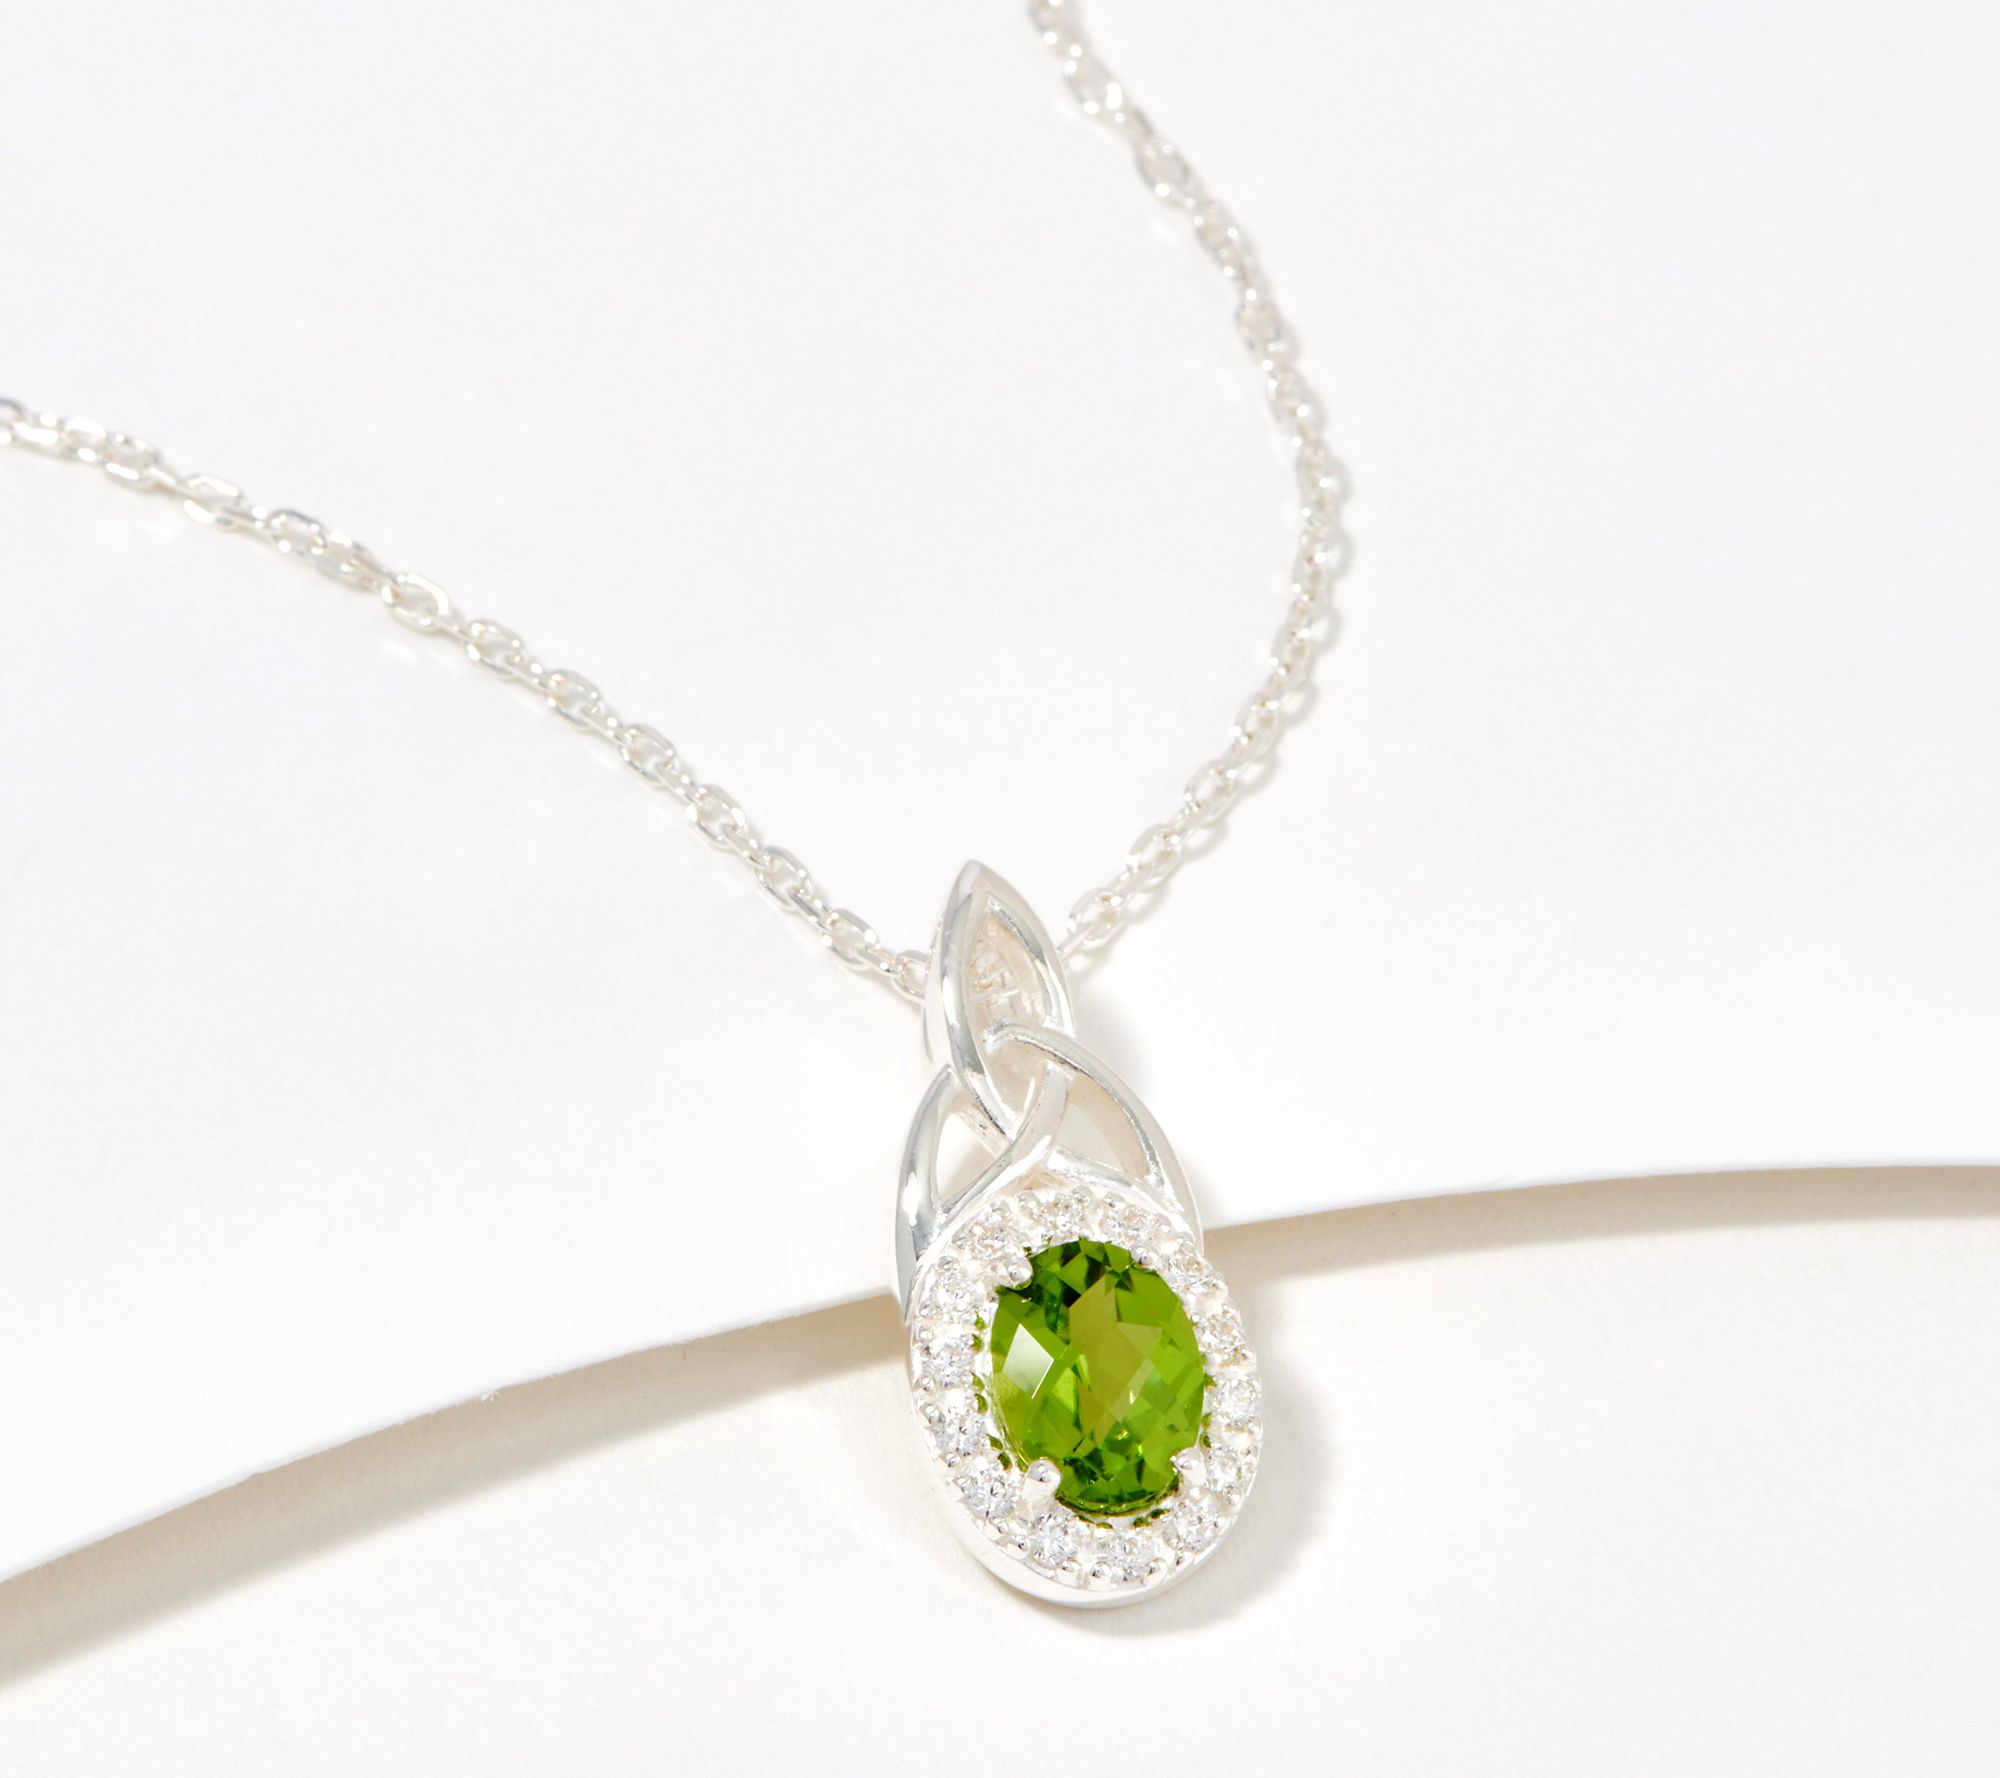 JMH Jewellery Sterling Silver and Gemstone Trinty Knot Necklace - QVC.com